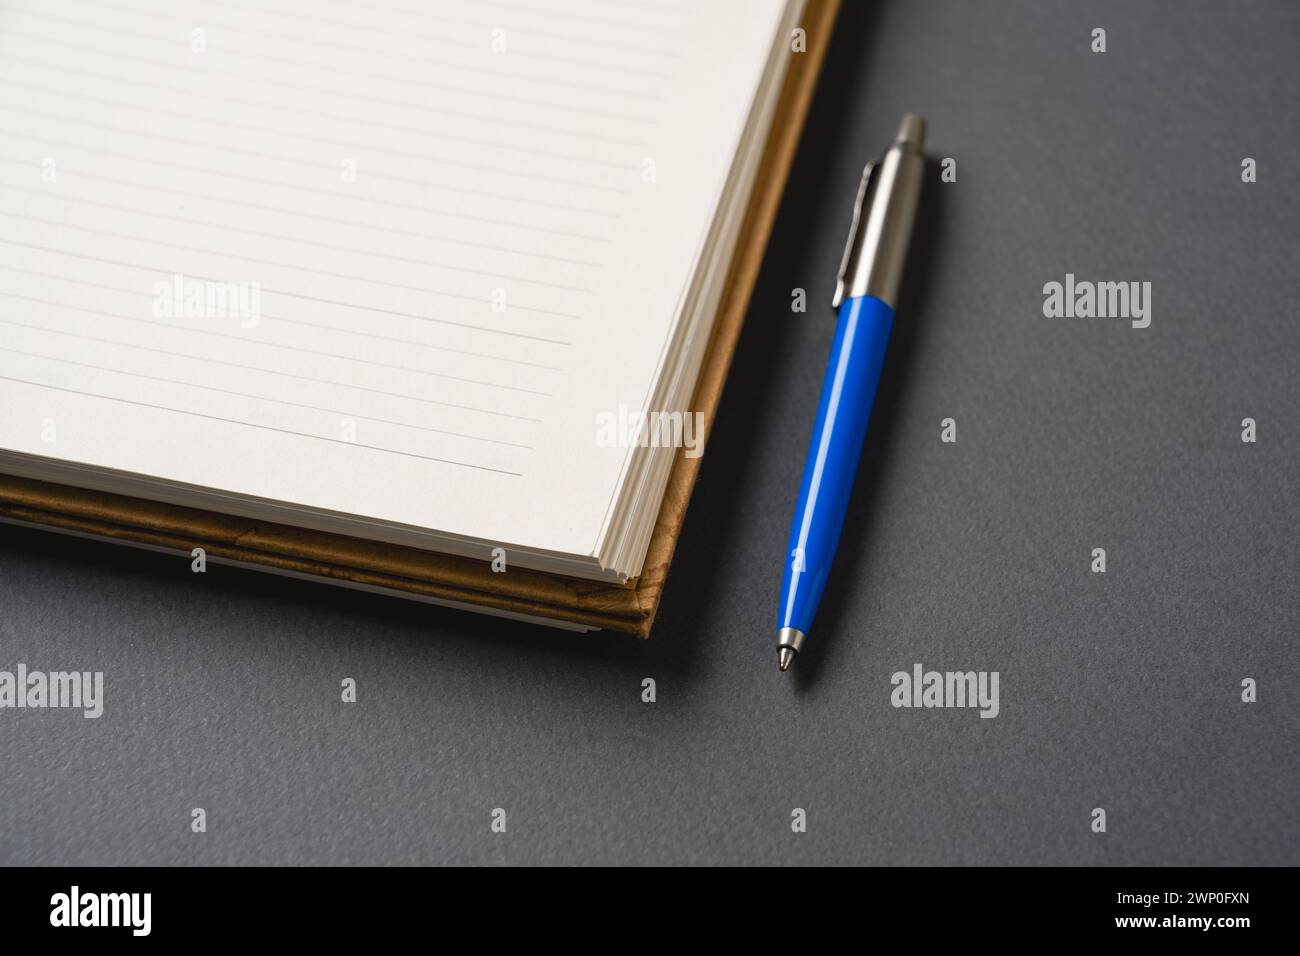 Ballpoint pen made of blue plastic and metal standing on lined notebook Stock Photo